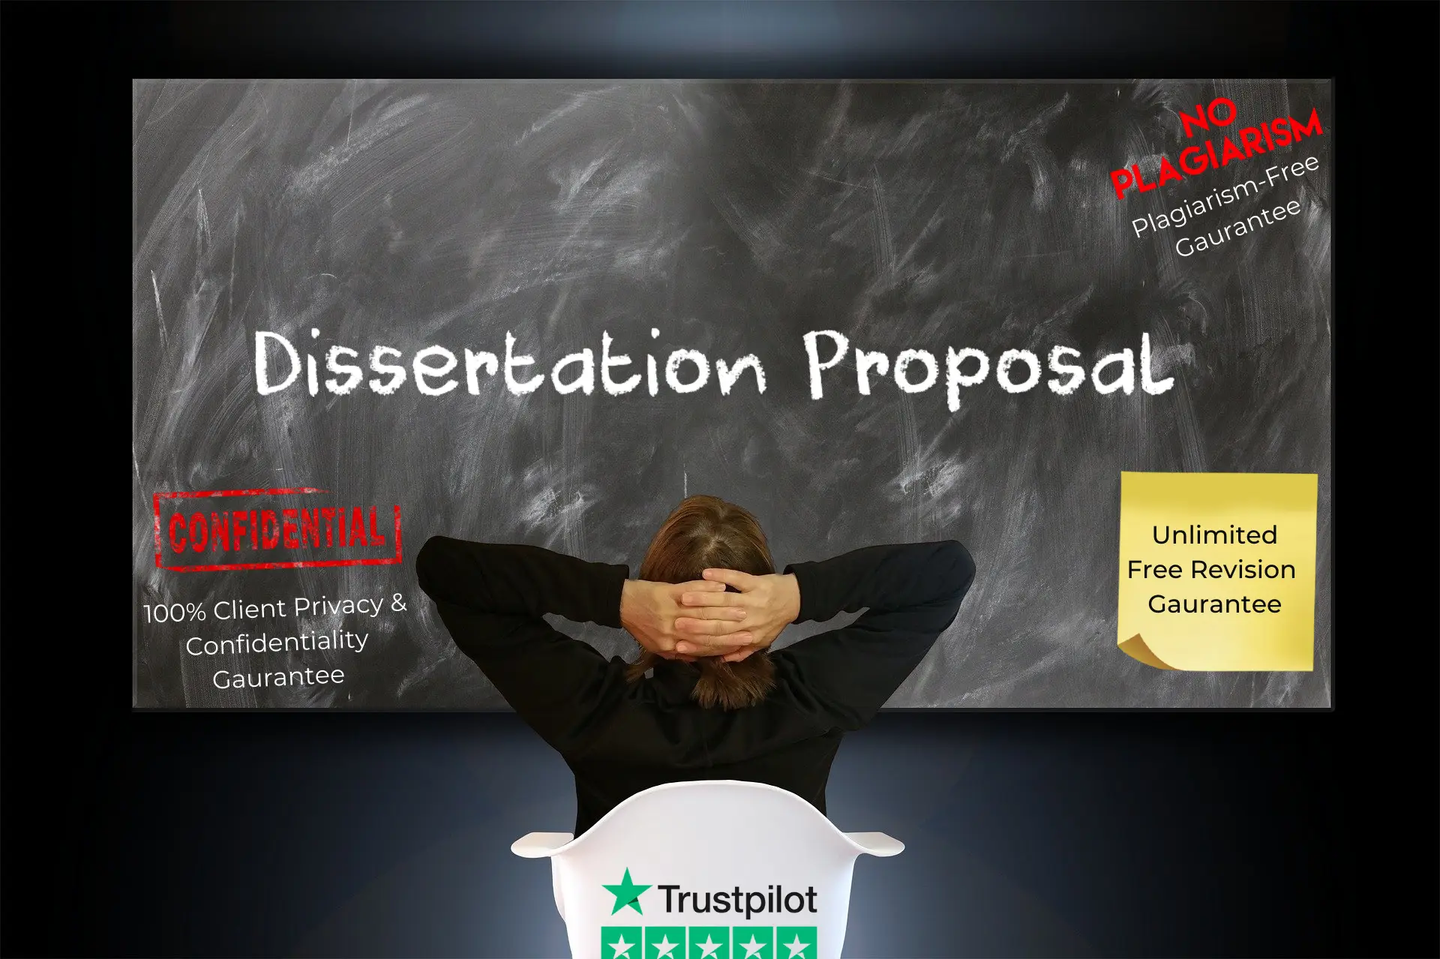 Tell us about your dissertation proposal... - Grammarholic